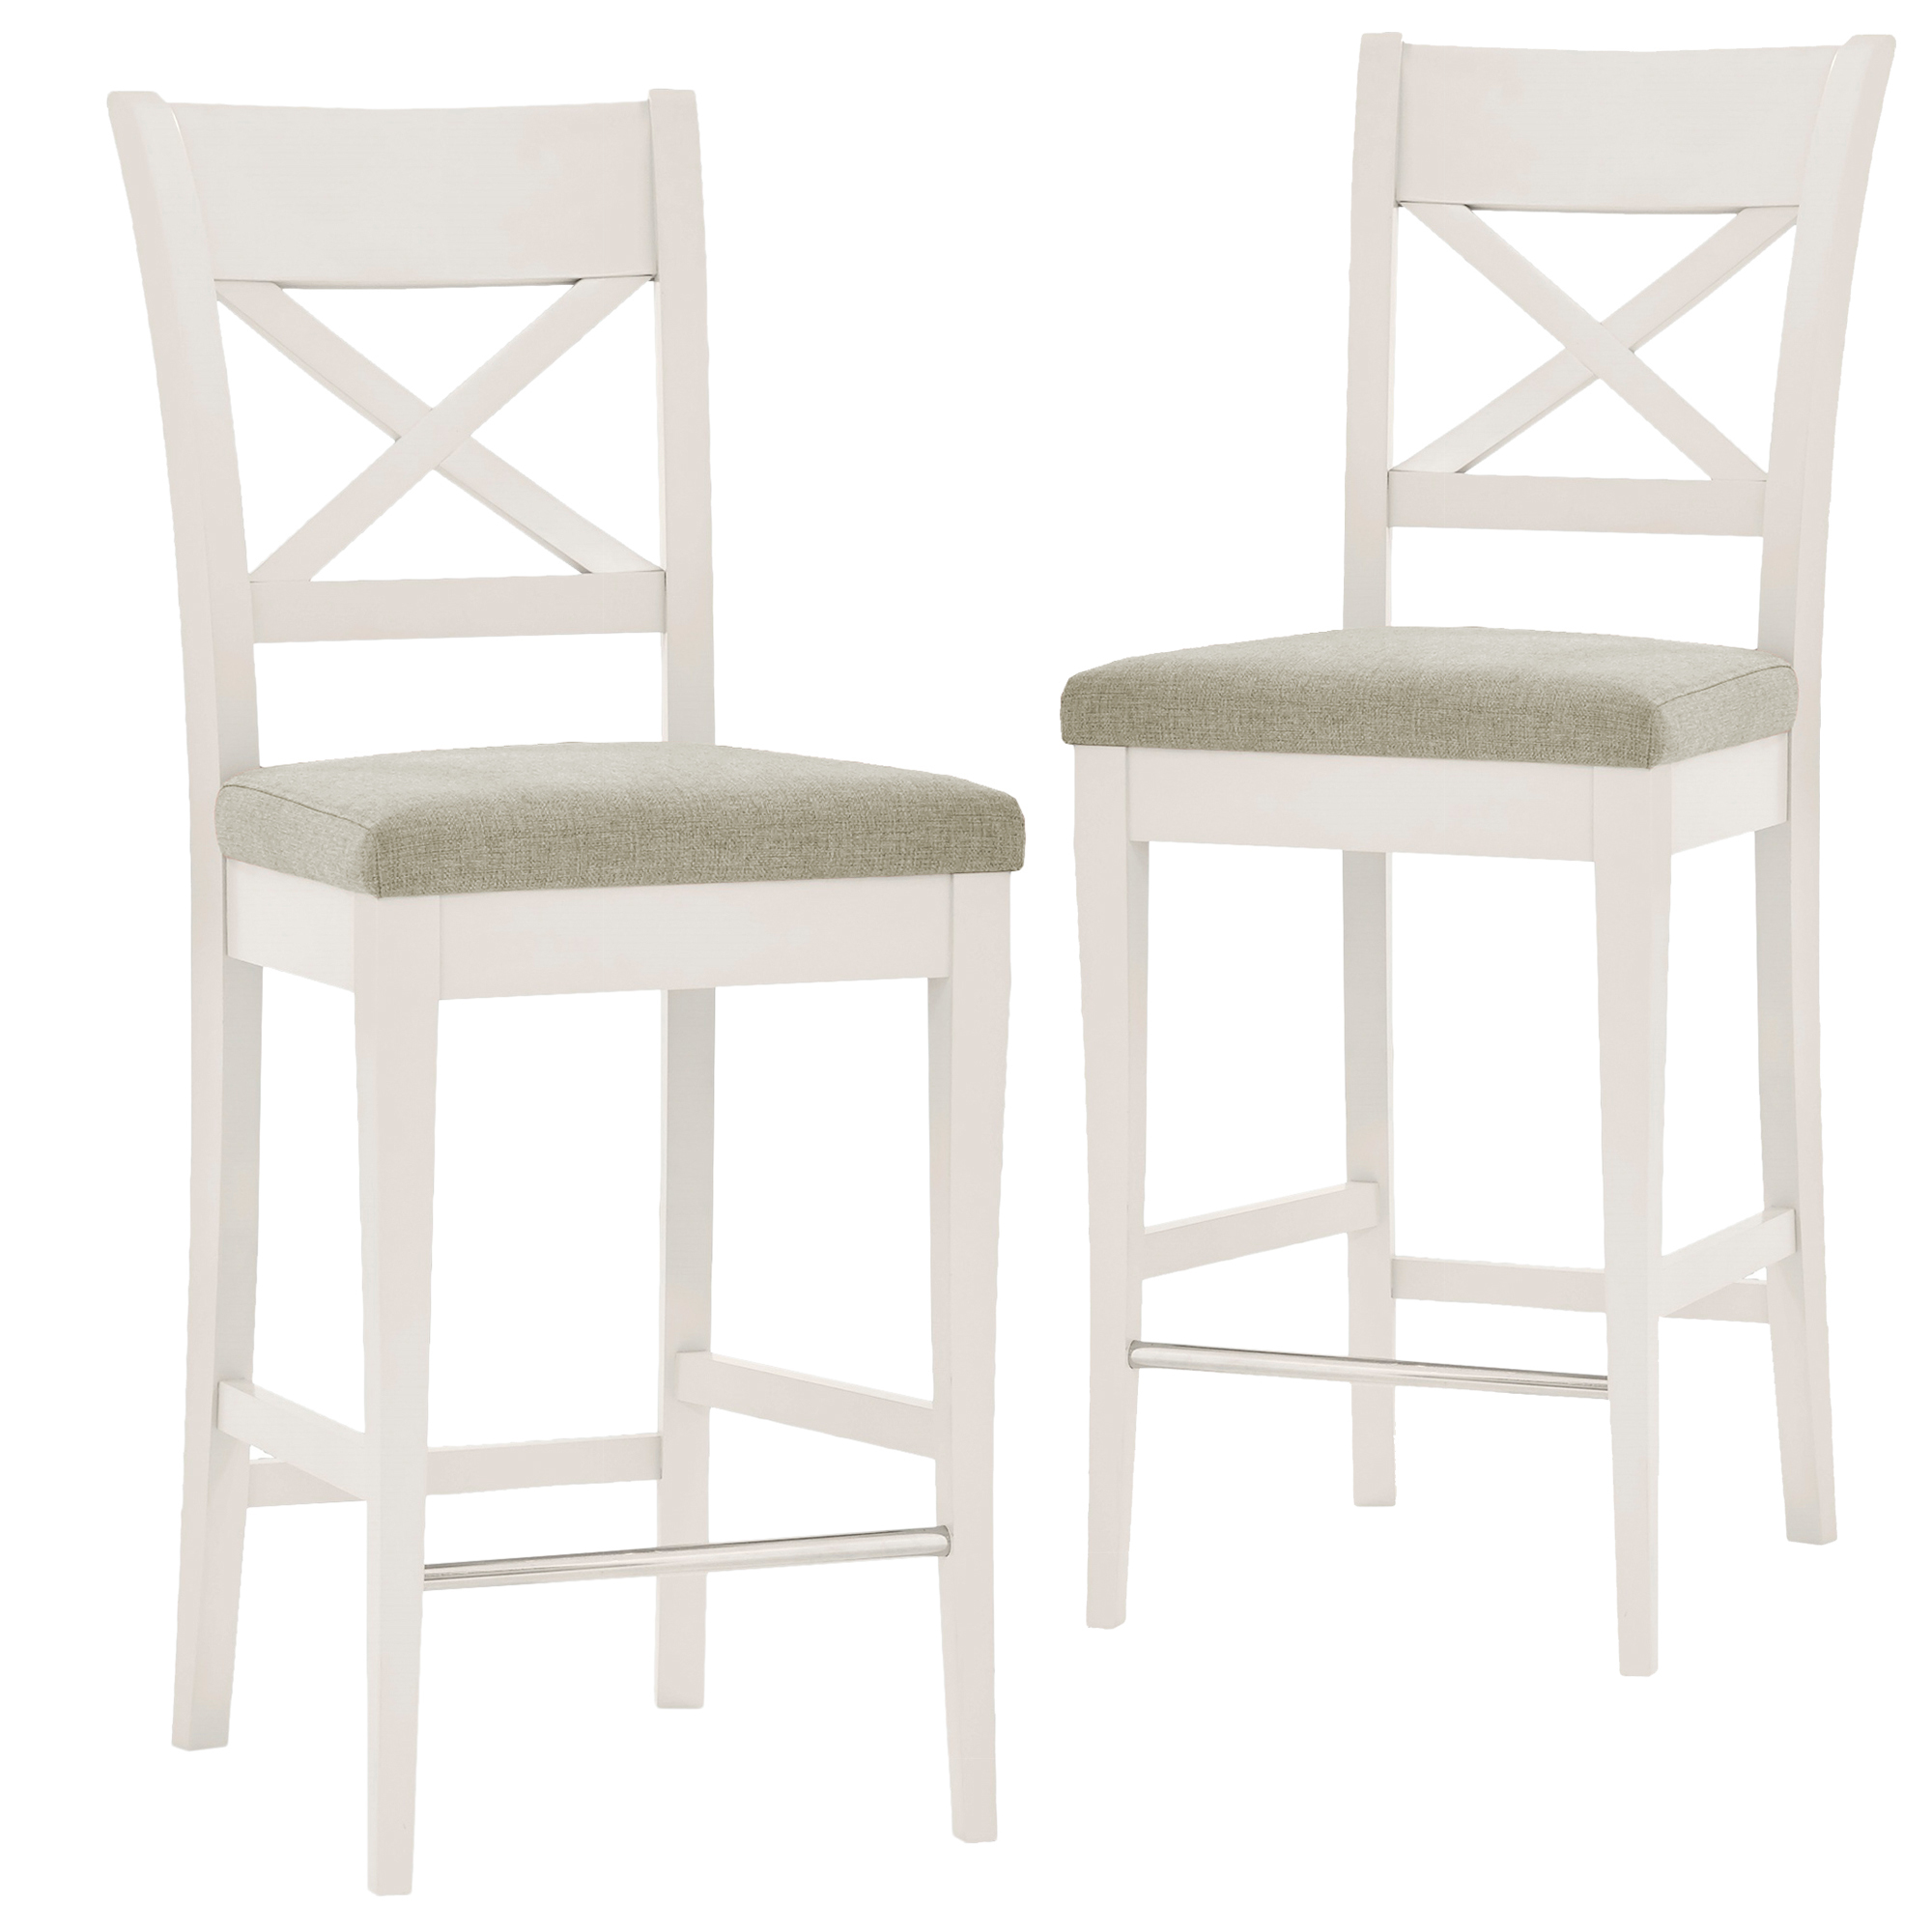 Temple Webster Emilia French, White Wood Cross Back Bar Stools